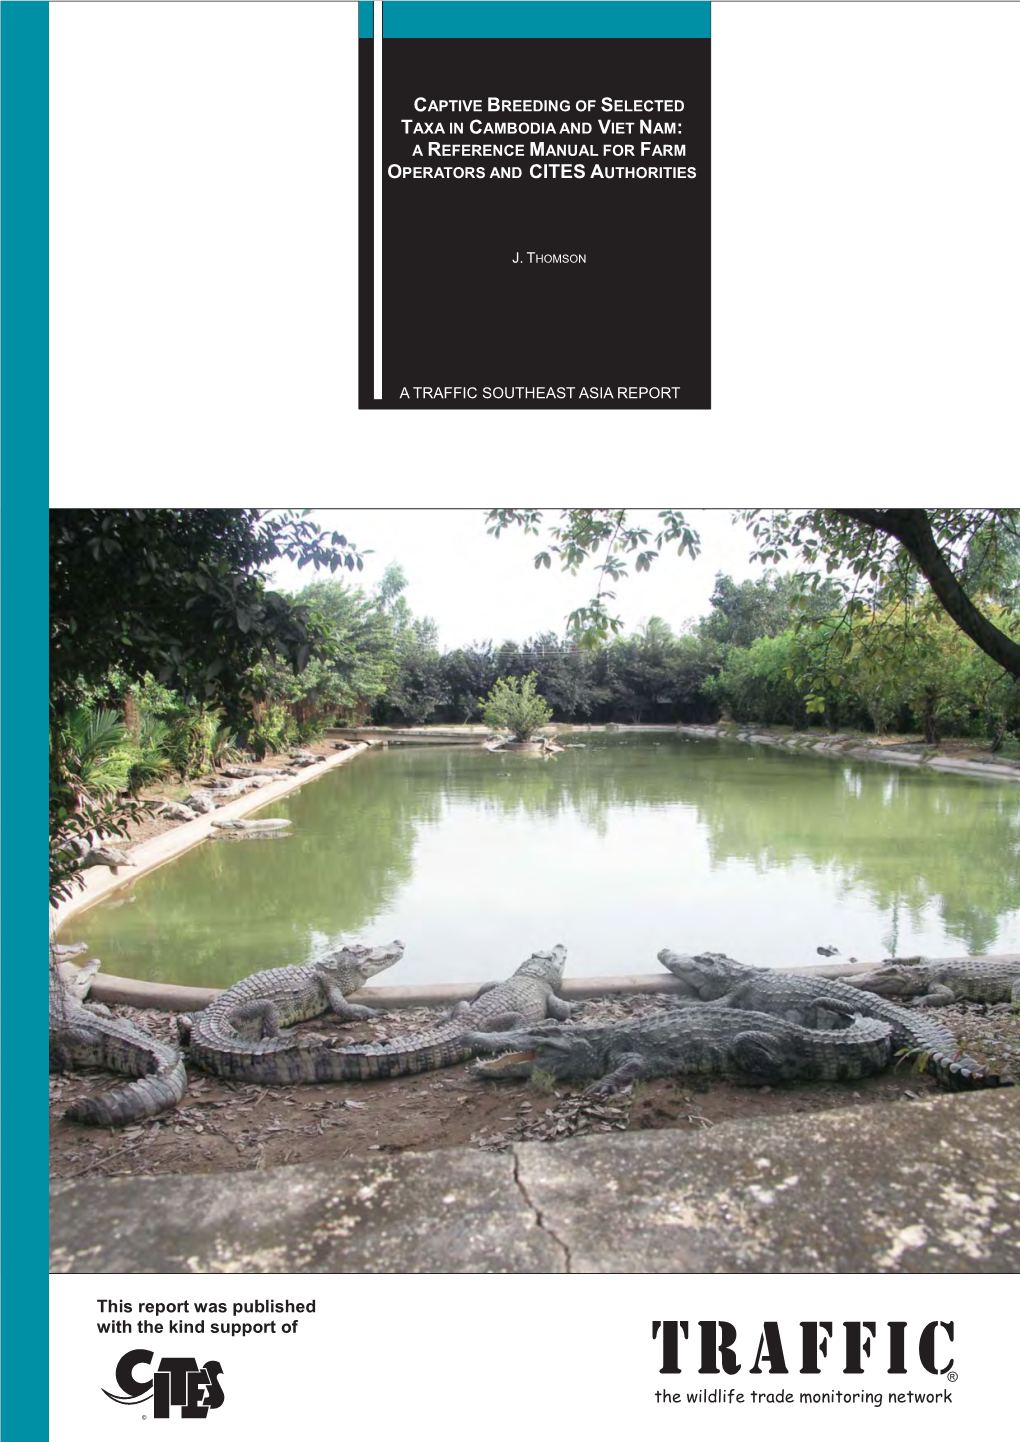 Captive Breeding of Selected Taxa in Cambodia and Viet Nam: a Reference Manual for Farm Operators and Cites Authorities